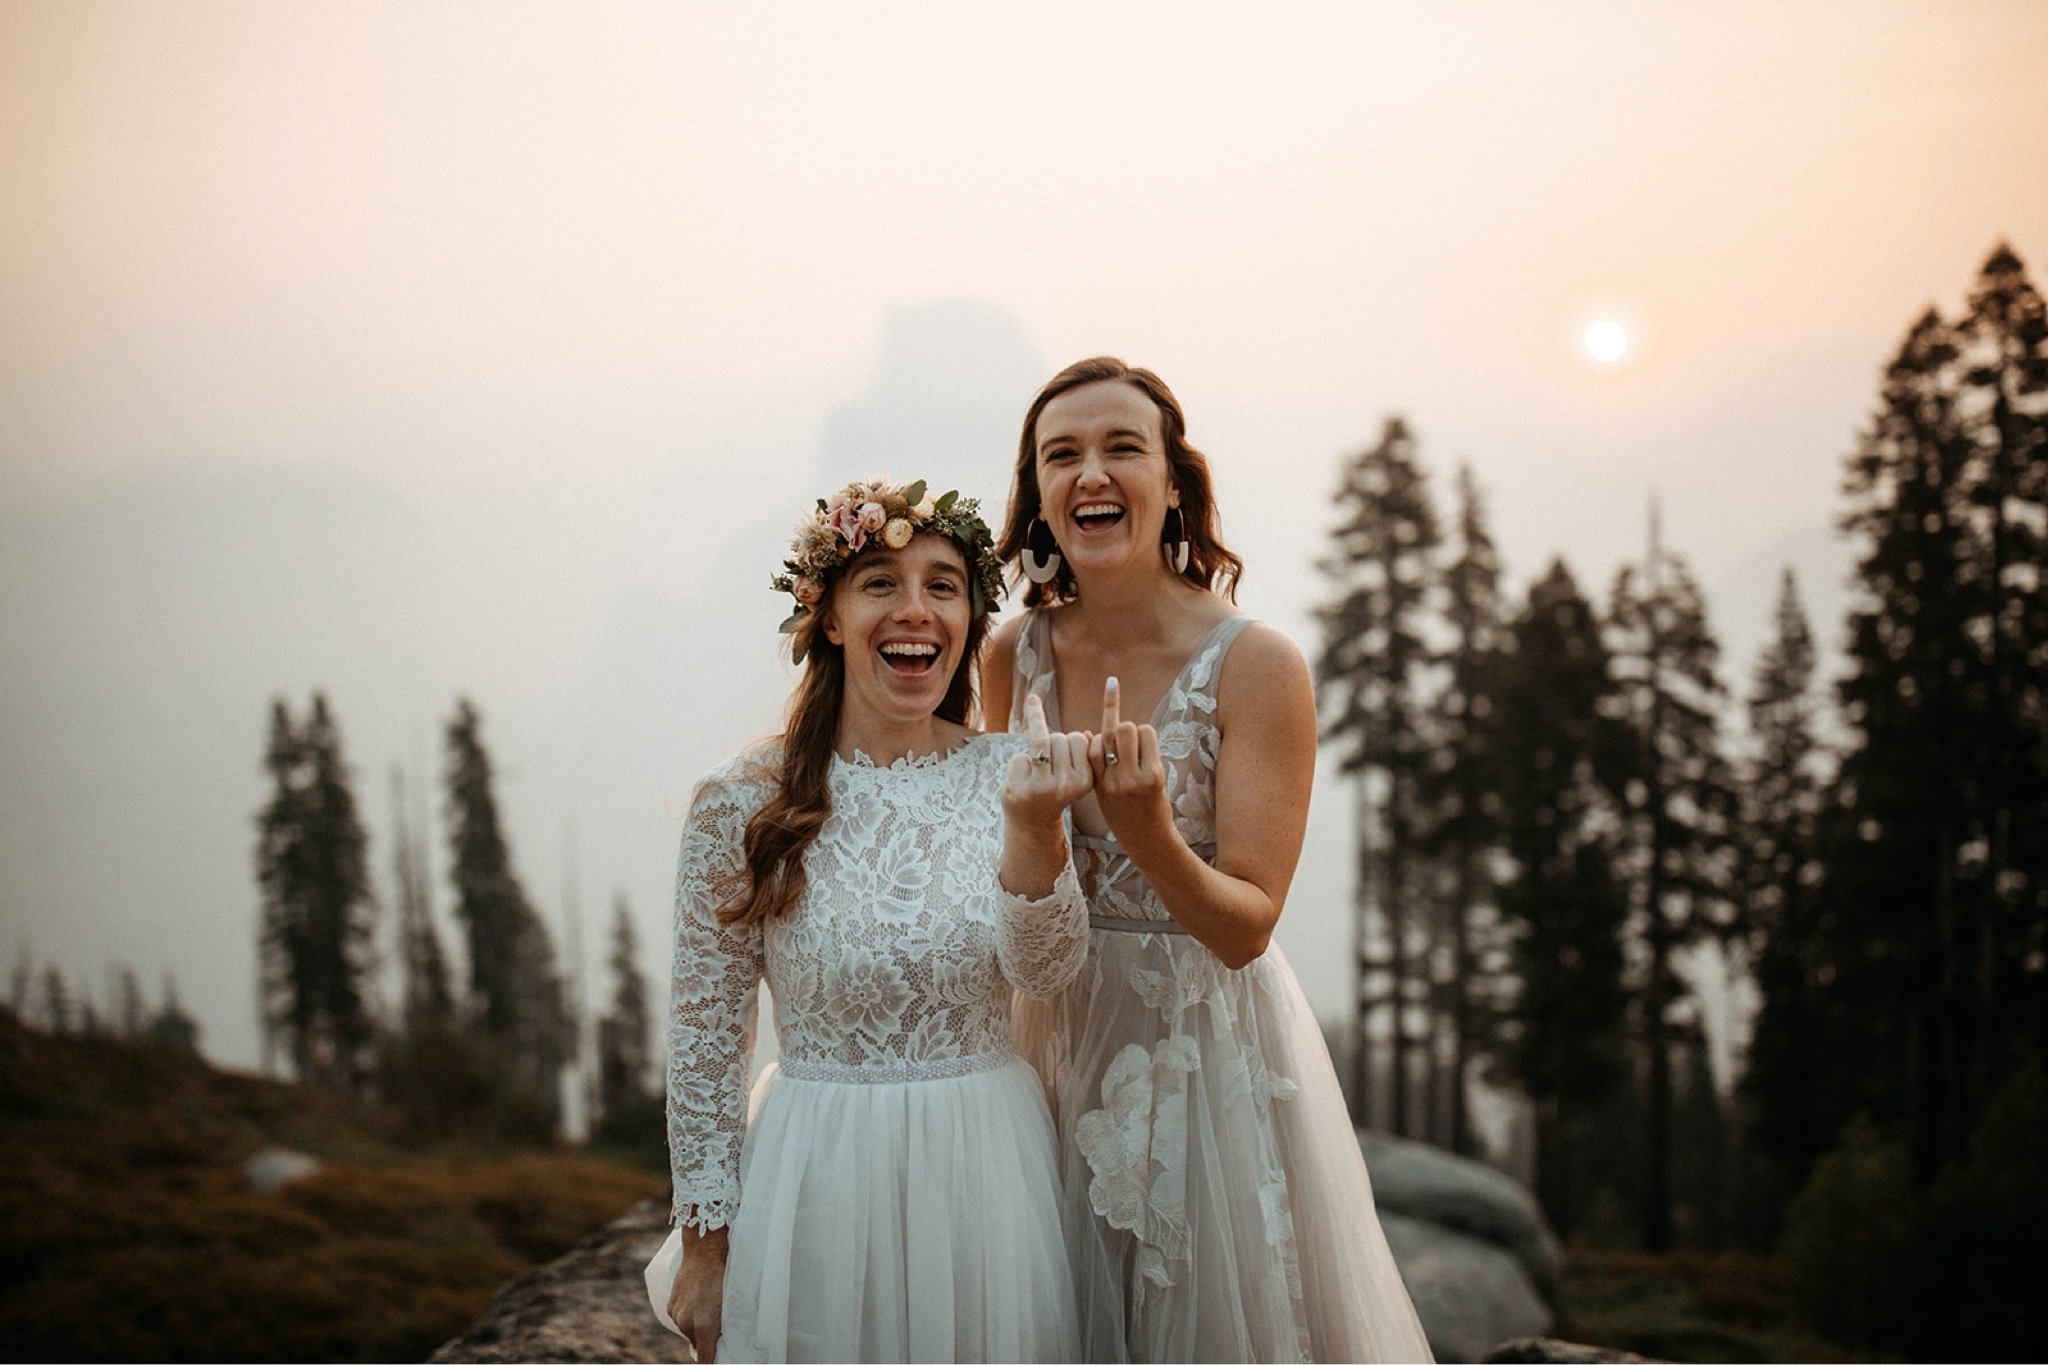 Yosemite National Park Elopement with Two Brides-Will Khoury72.jpg